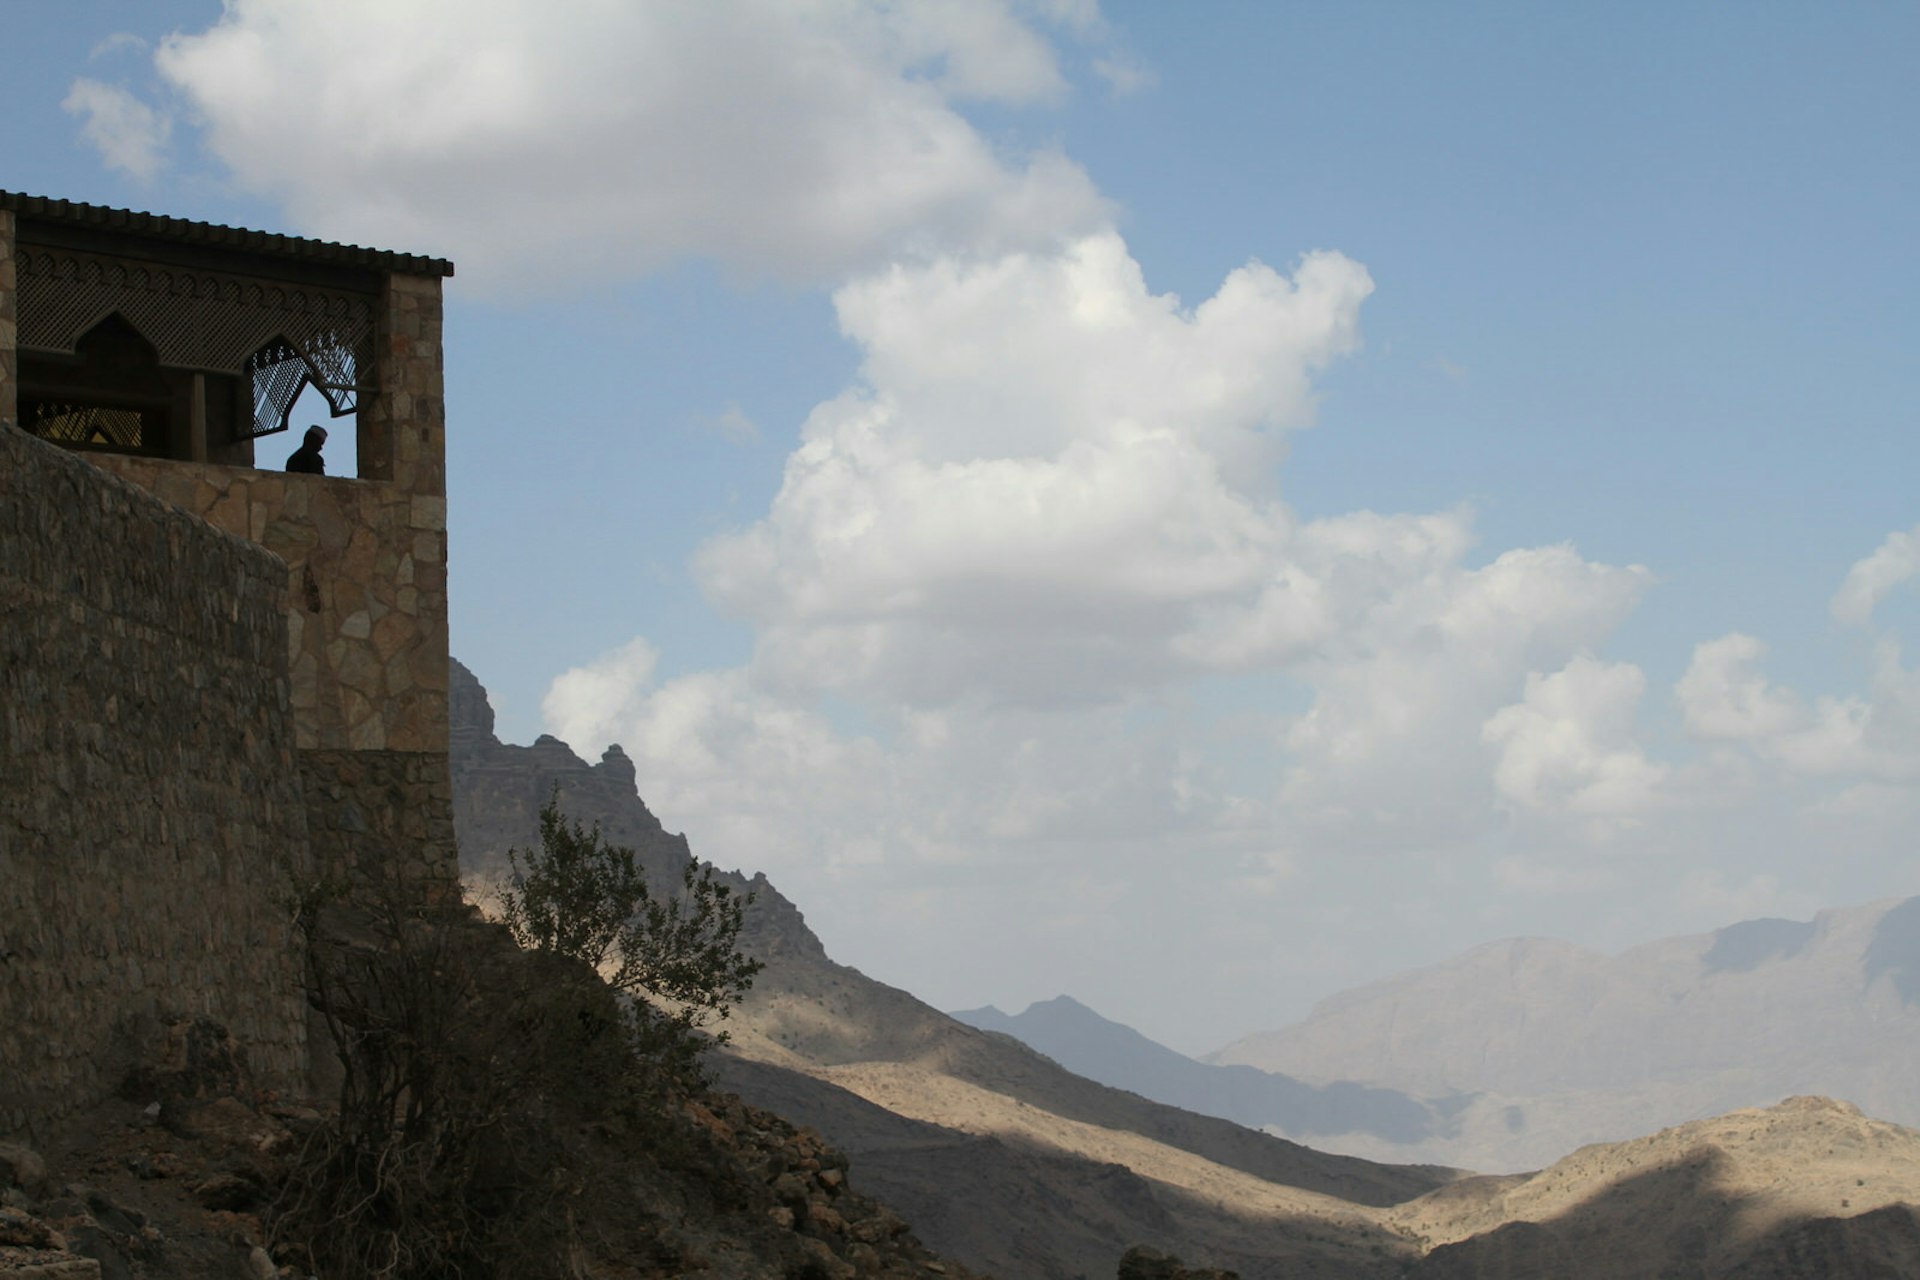 View of Wadi Mistal from Wakan village. Image by Jenny Walker / Lonely Planet